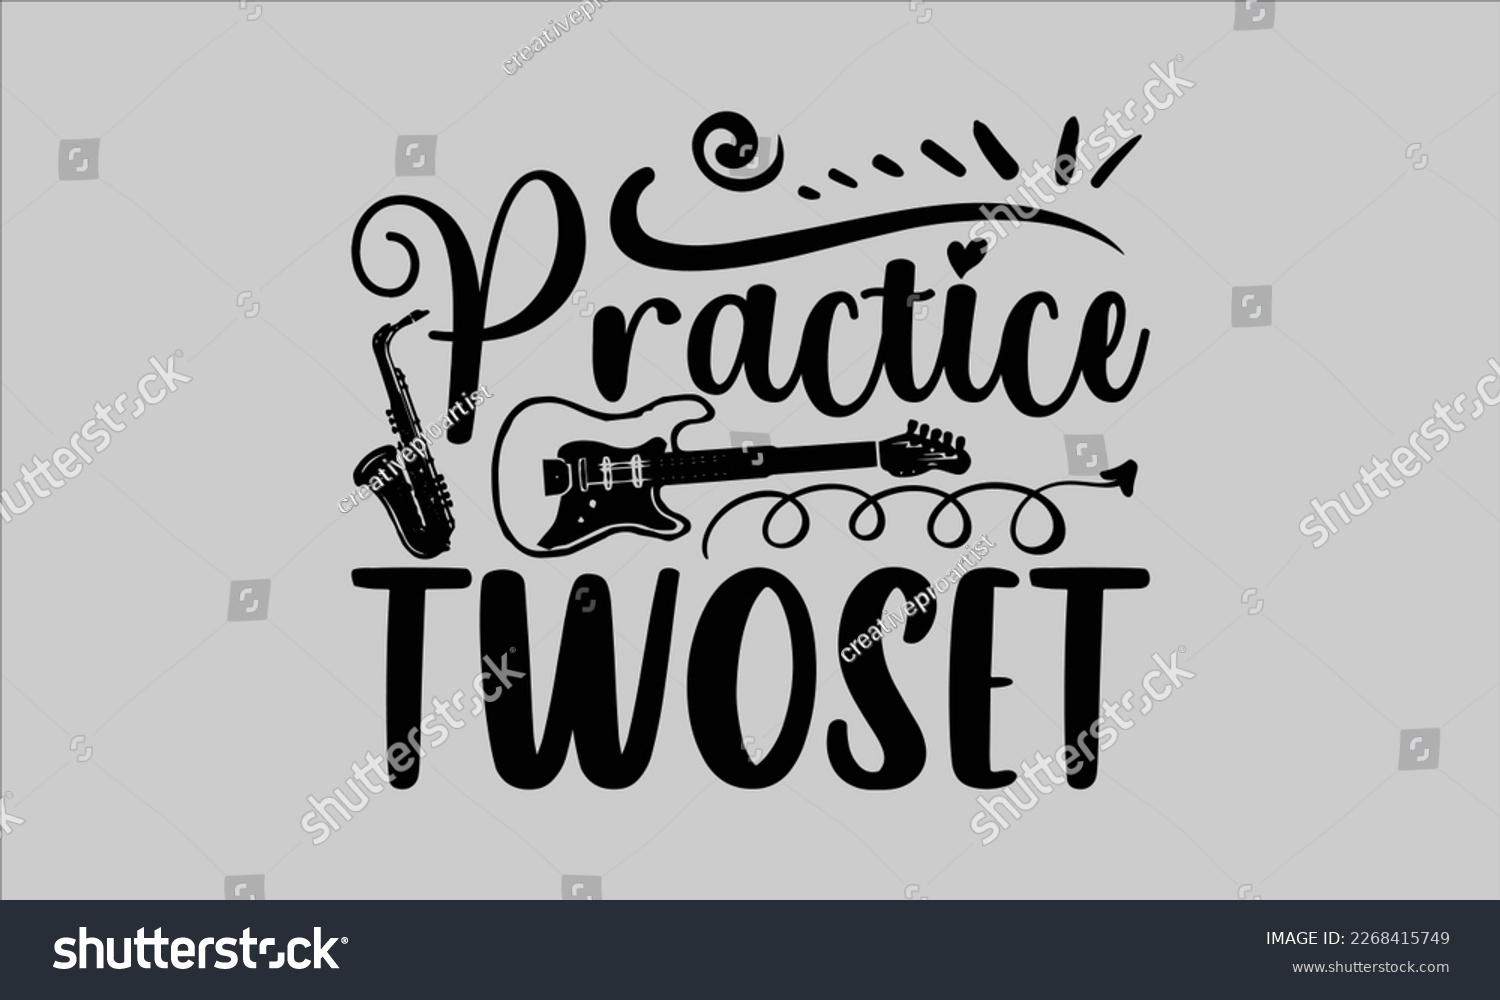 SVG of Practice twoset- Piano t- shirt design, Template Vector and Sports illustration, lettering on a white background for svg Cutting Machine, posters mog, bags eps 10. svg